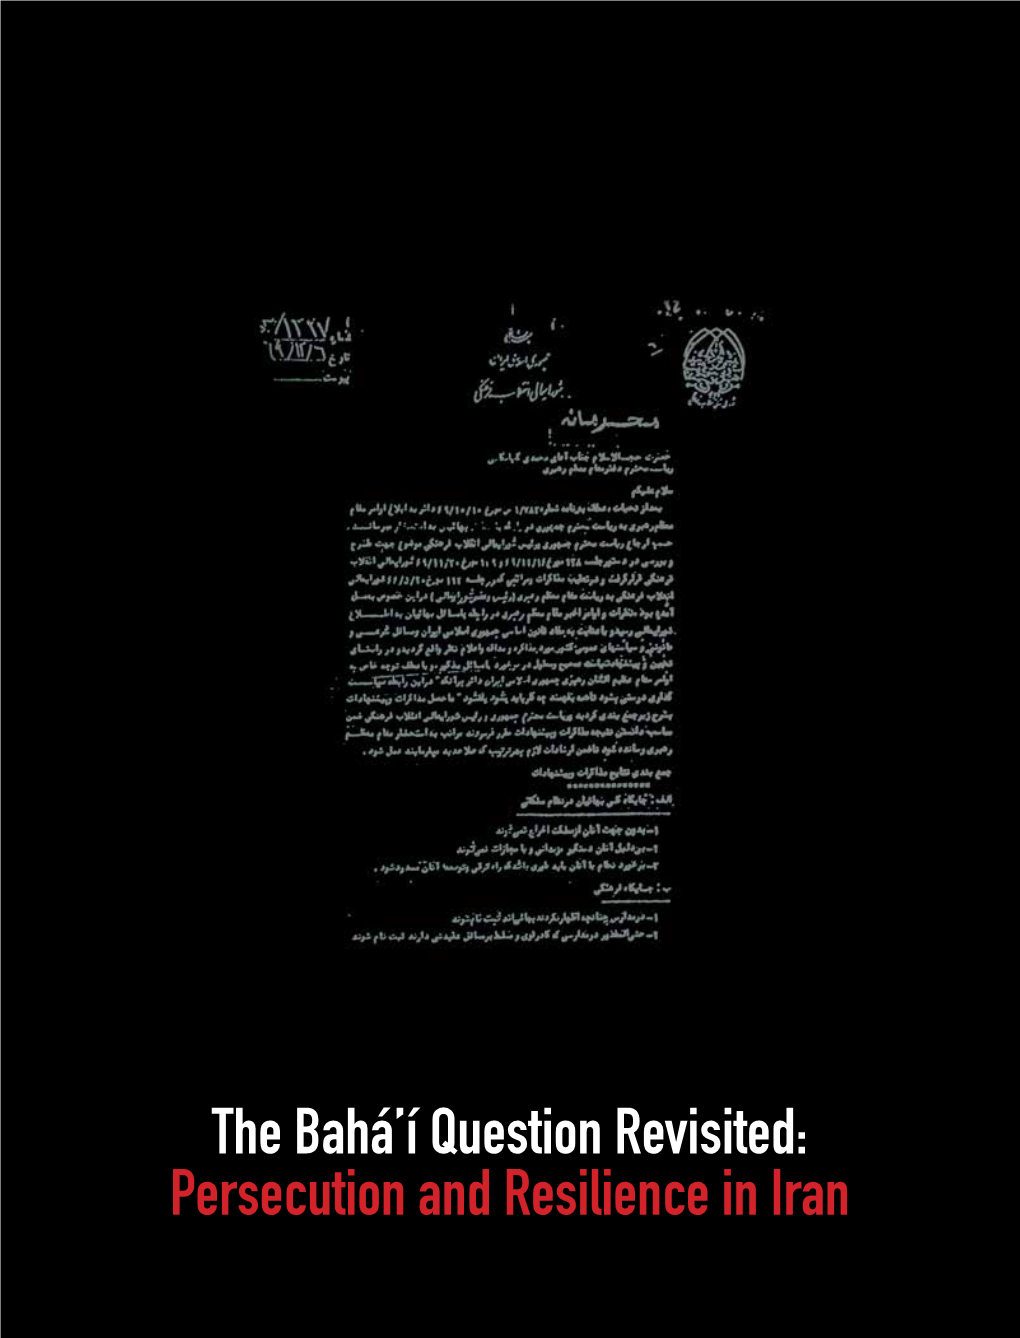 The Bahá'í Question Revisited: Persecution and Resilience in Iran